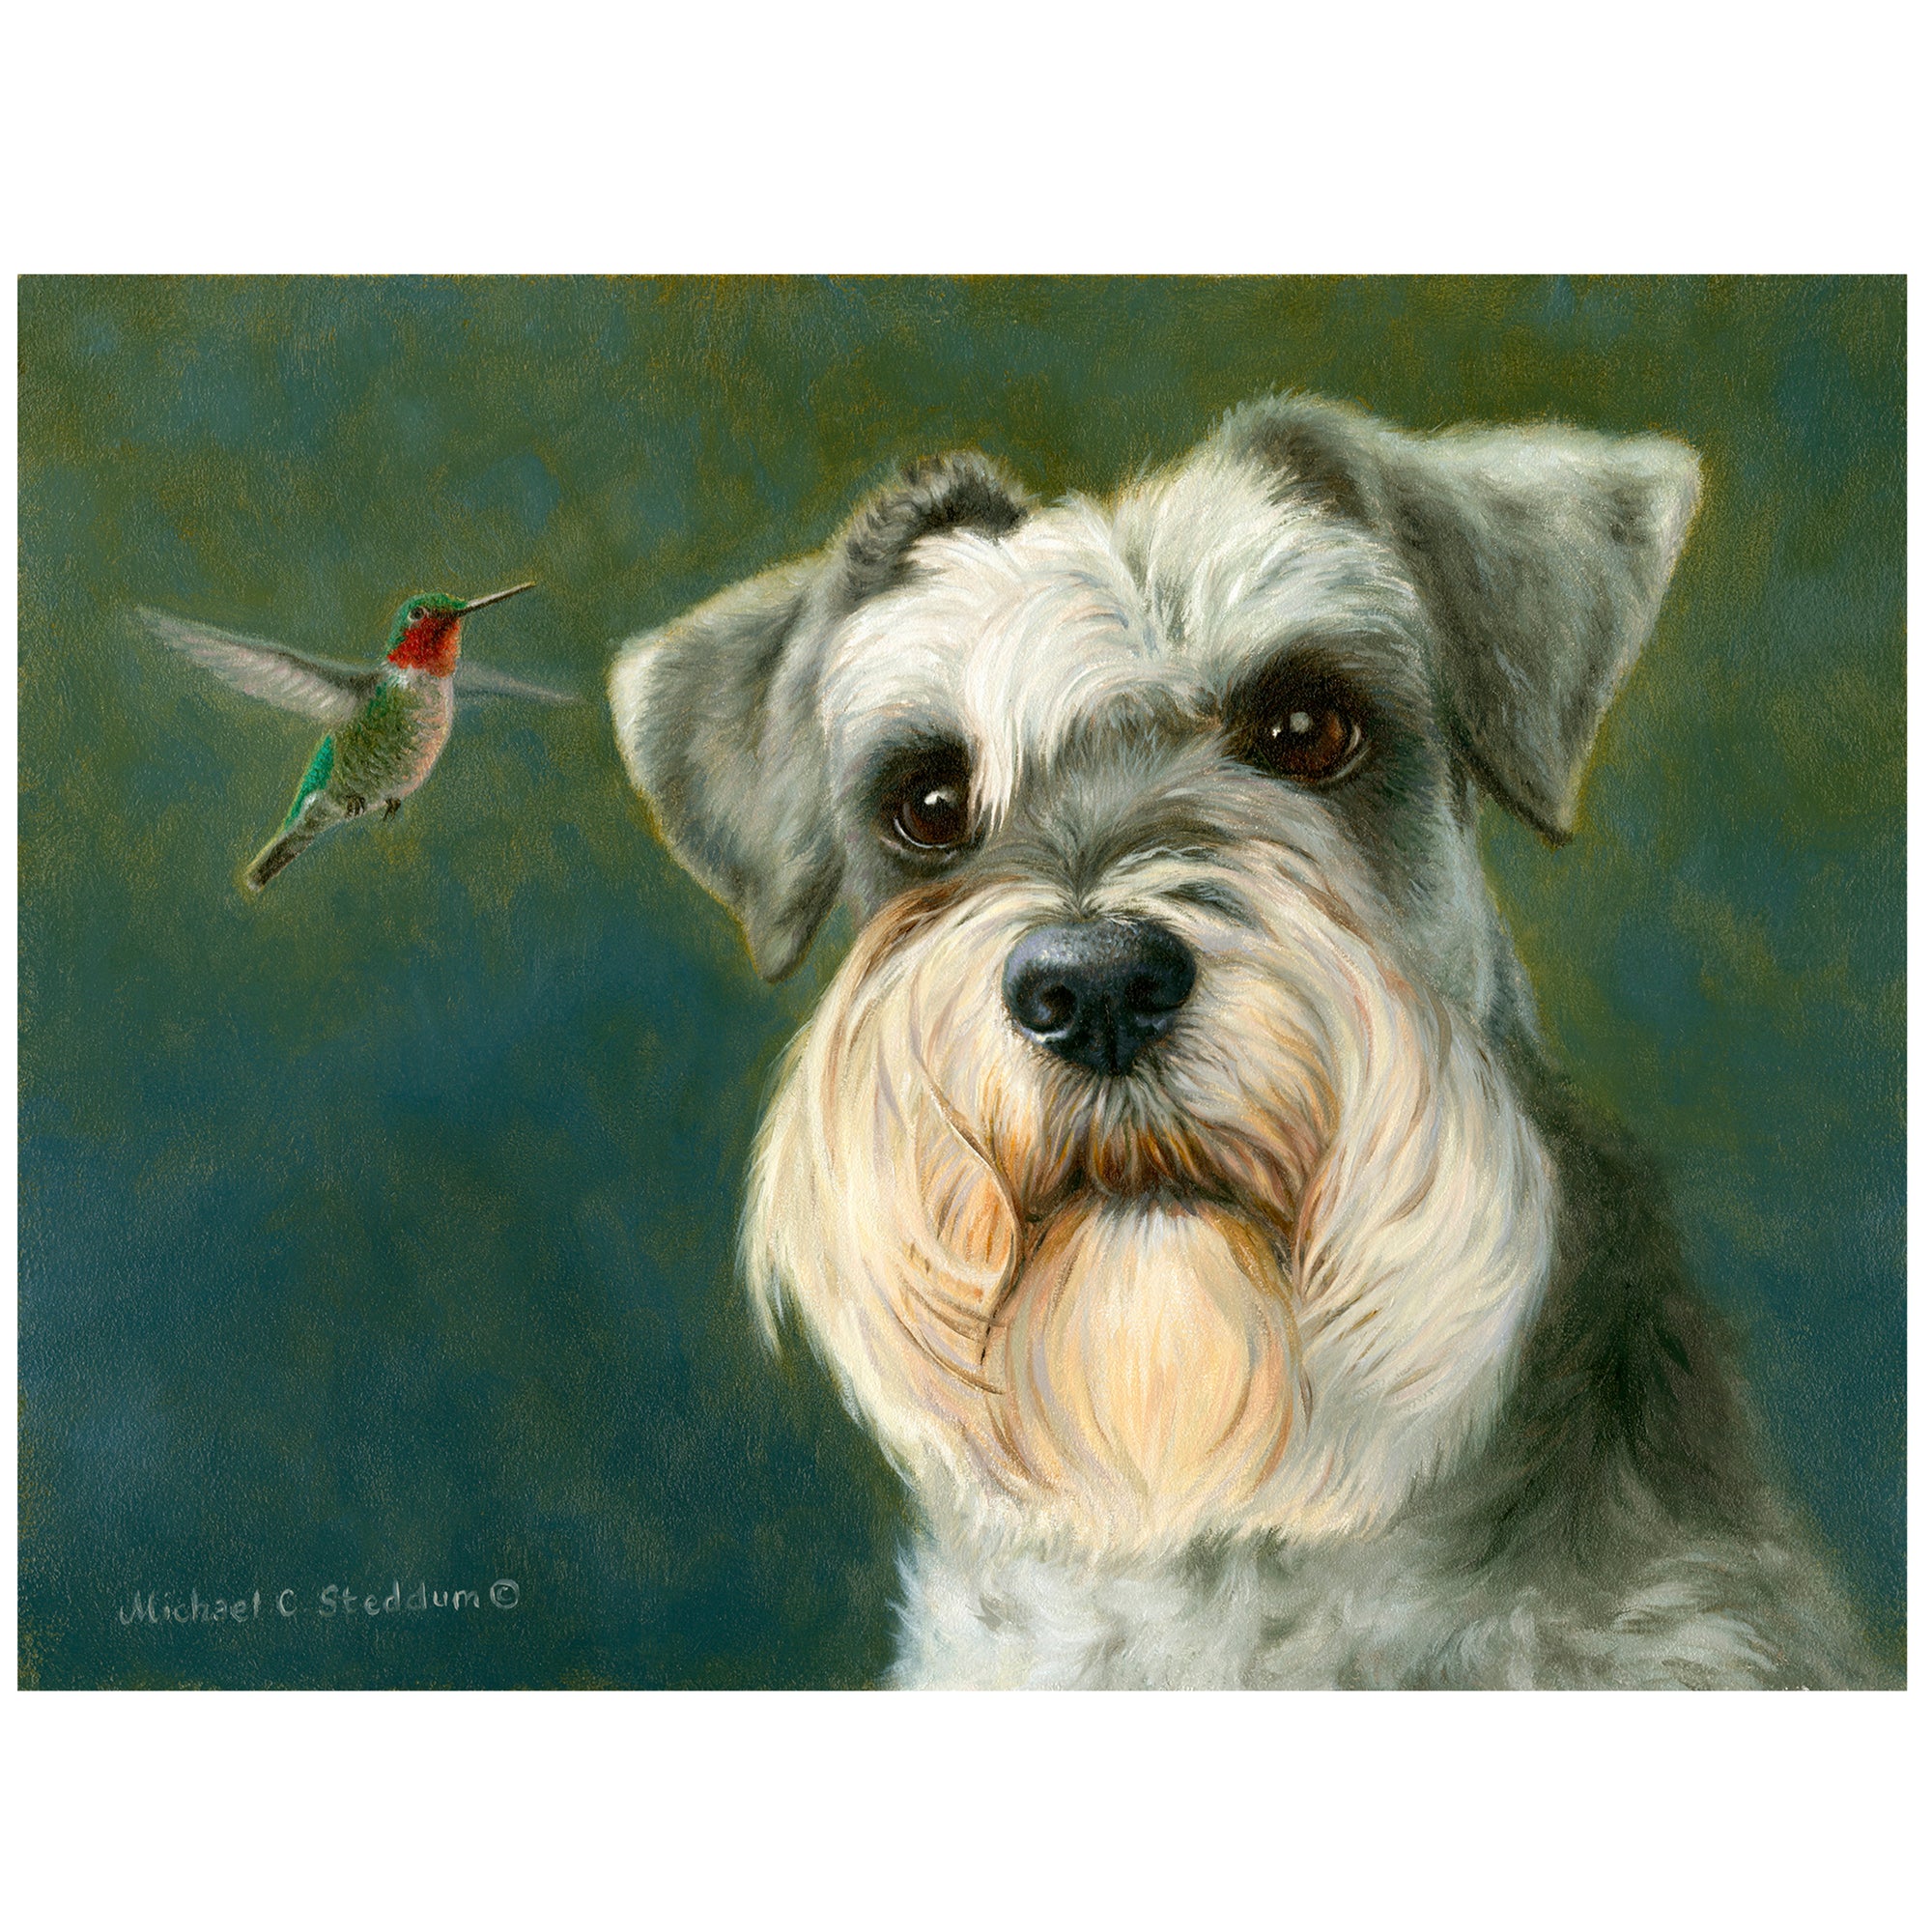 "The Visitor" A Schnauzer Art Reproduction Print by Michael Steddum - Limited Edition Signed and Numbered Schnauzer Art Print - Ideal for a Schnauzer Gift